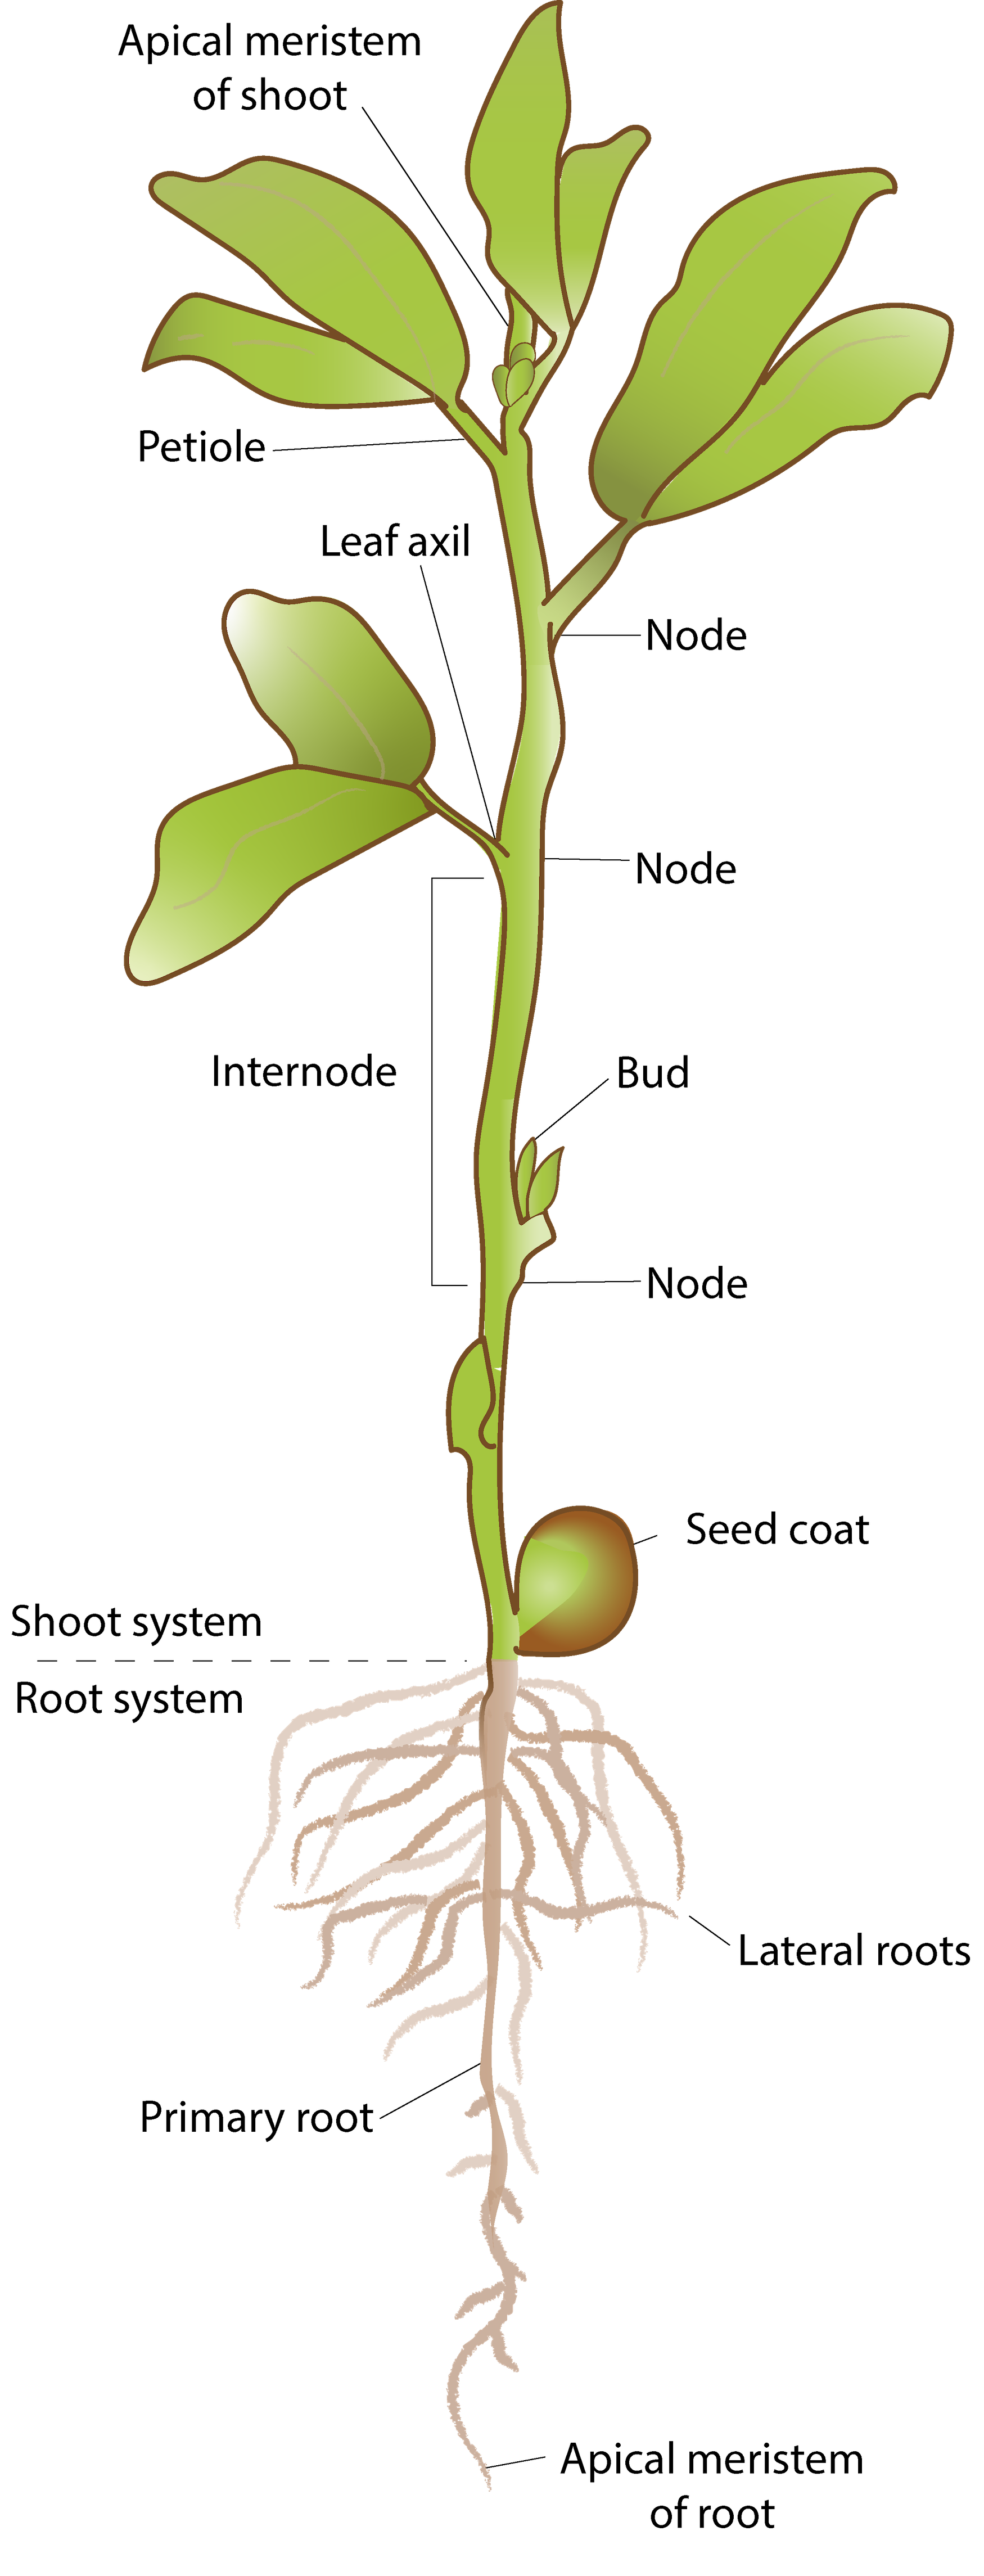 A shoot with leaves and roots. The top of the stem is labeled apical meristem of shoot. From the top down, a small section of stem connecting leaves to the main stem is labeled petiole. The junction between petiole and stem is labeled node. The space between nodes is labeled internode. At one node, small leaves are beginning to grow, labeled bud. At the bottom of the stem, a circular seed with brown seed coat then bottom root system with horizontal lateral roots, long primary root, and the root tip labeled apical meristem of root.